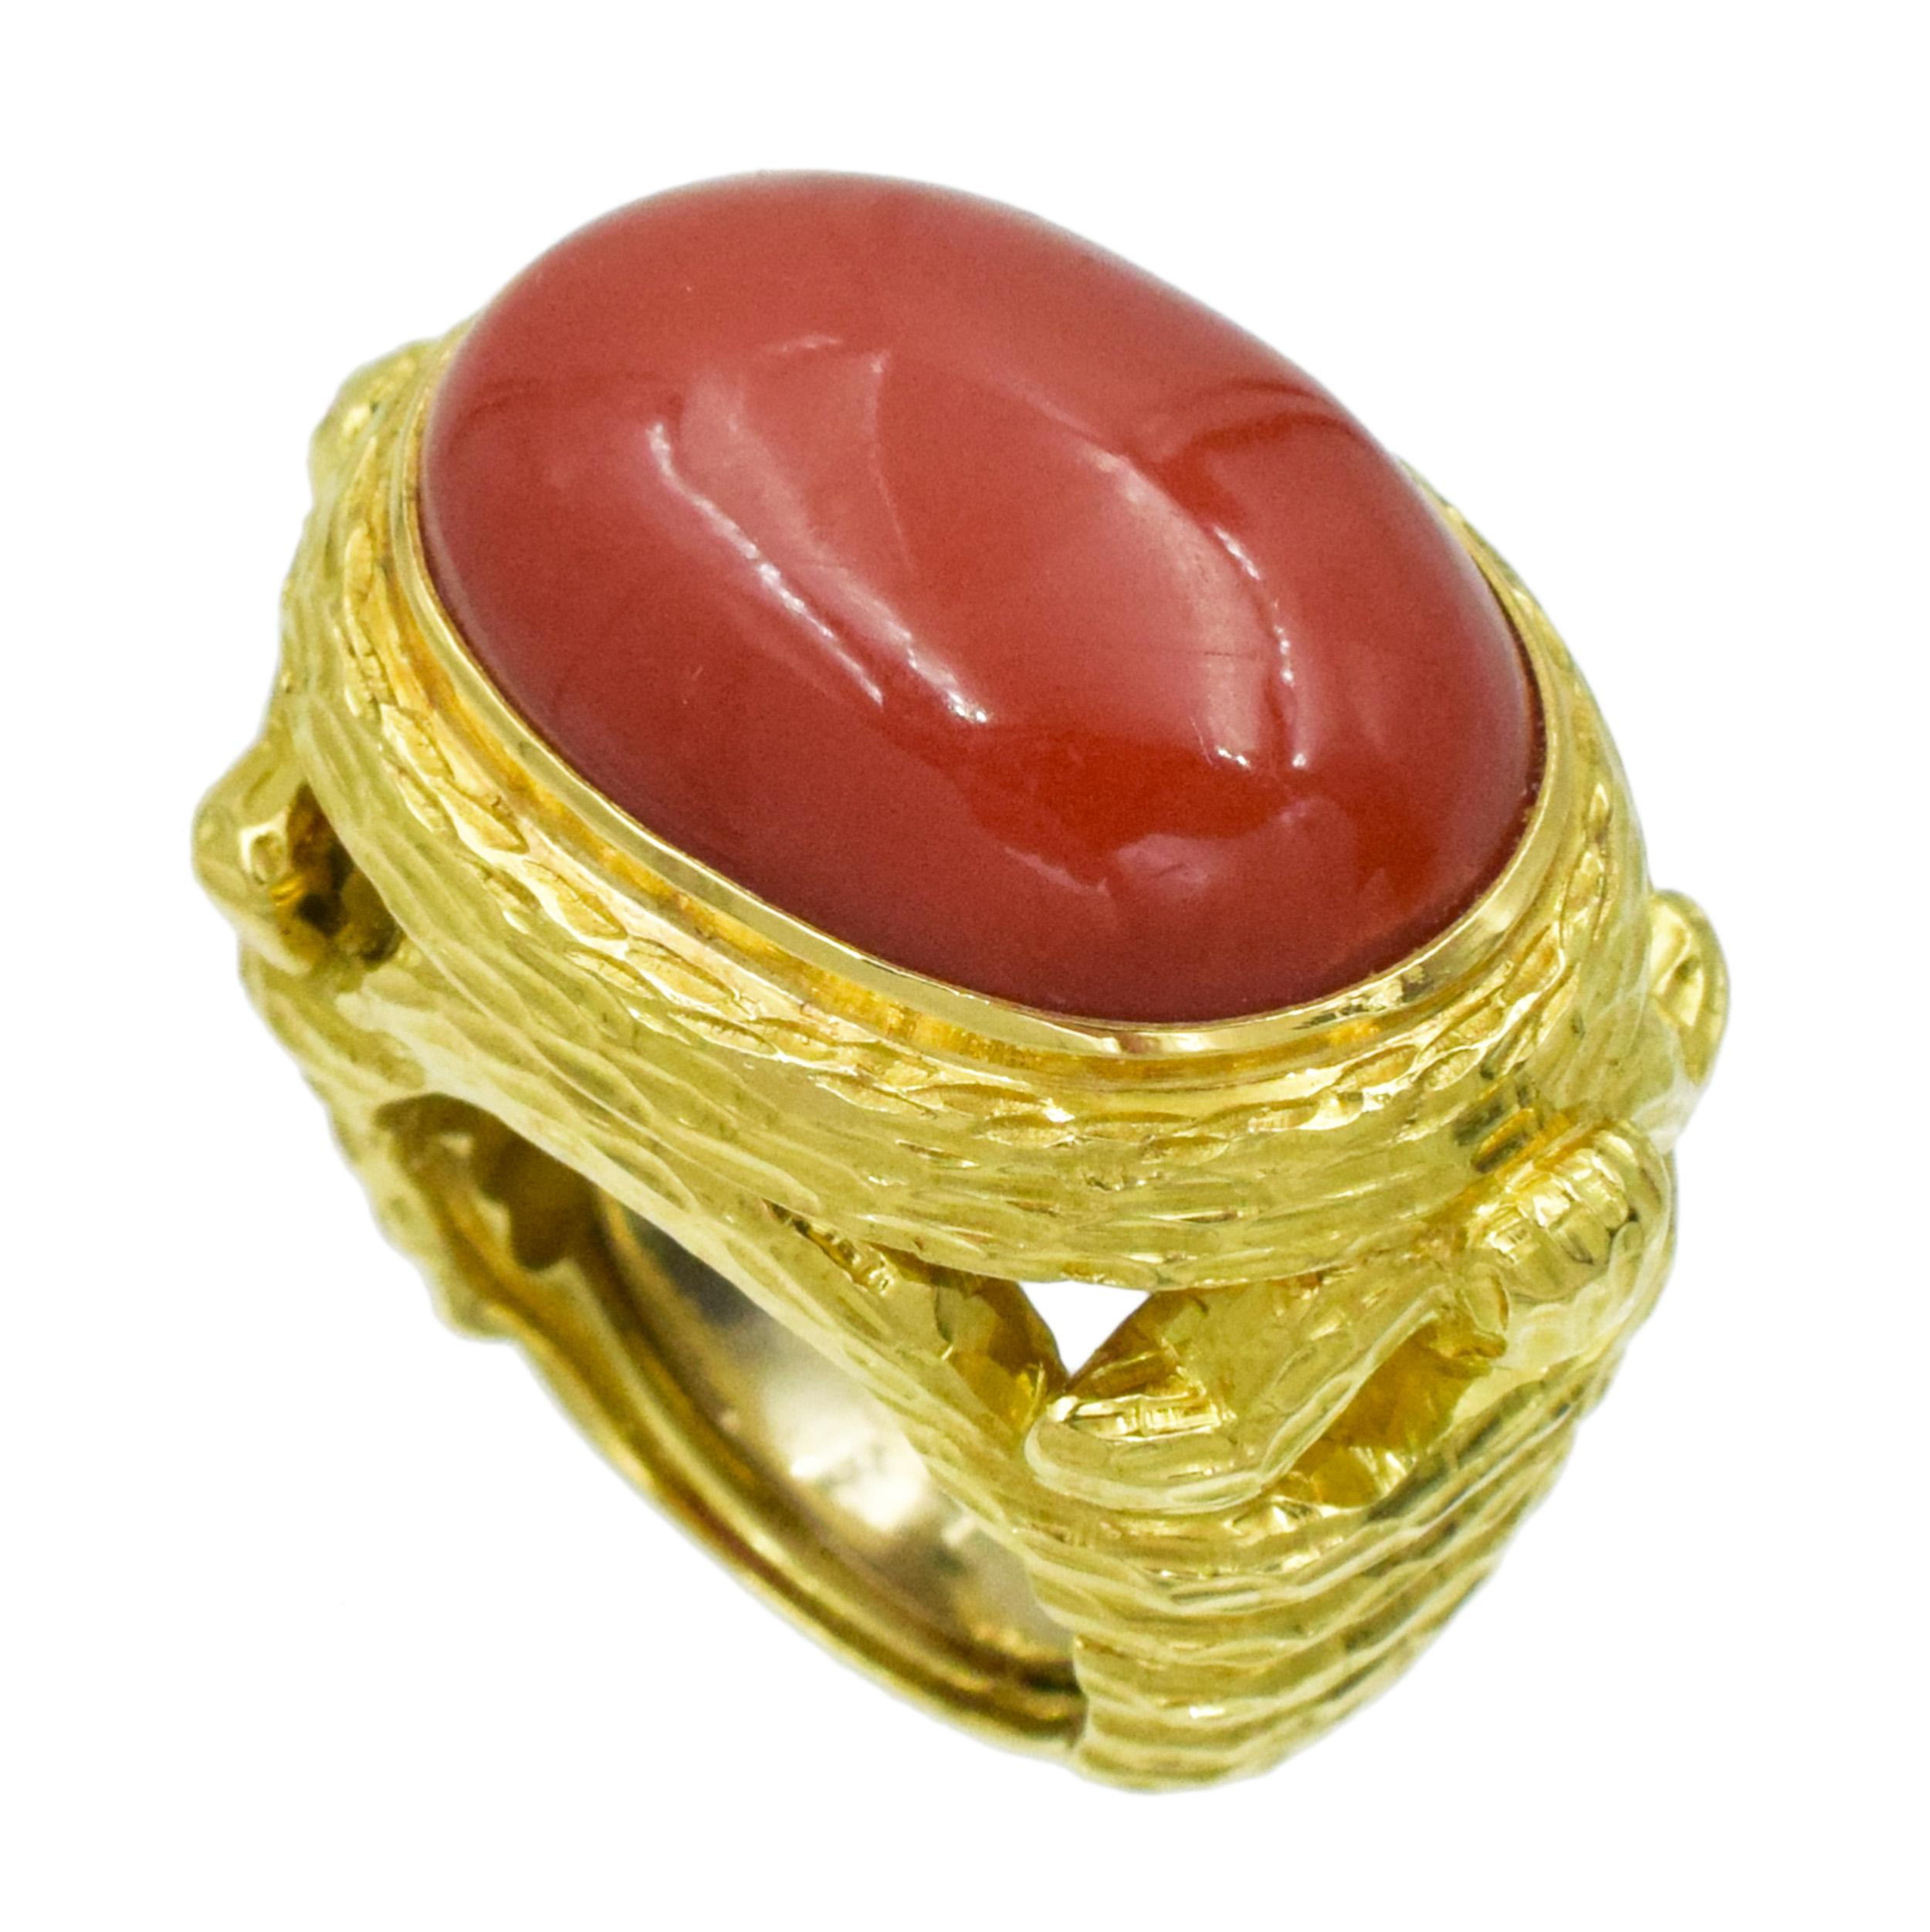 David Webb coral cocktail ring in 18k yellow gold.
Center of the ring features horizontally set oval cabochon cut red coral, measuring approximately 23mm by 17mm, bezel set in 18k yelloow gold decorative mounting. Sides of the ring accented with